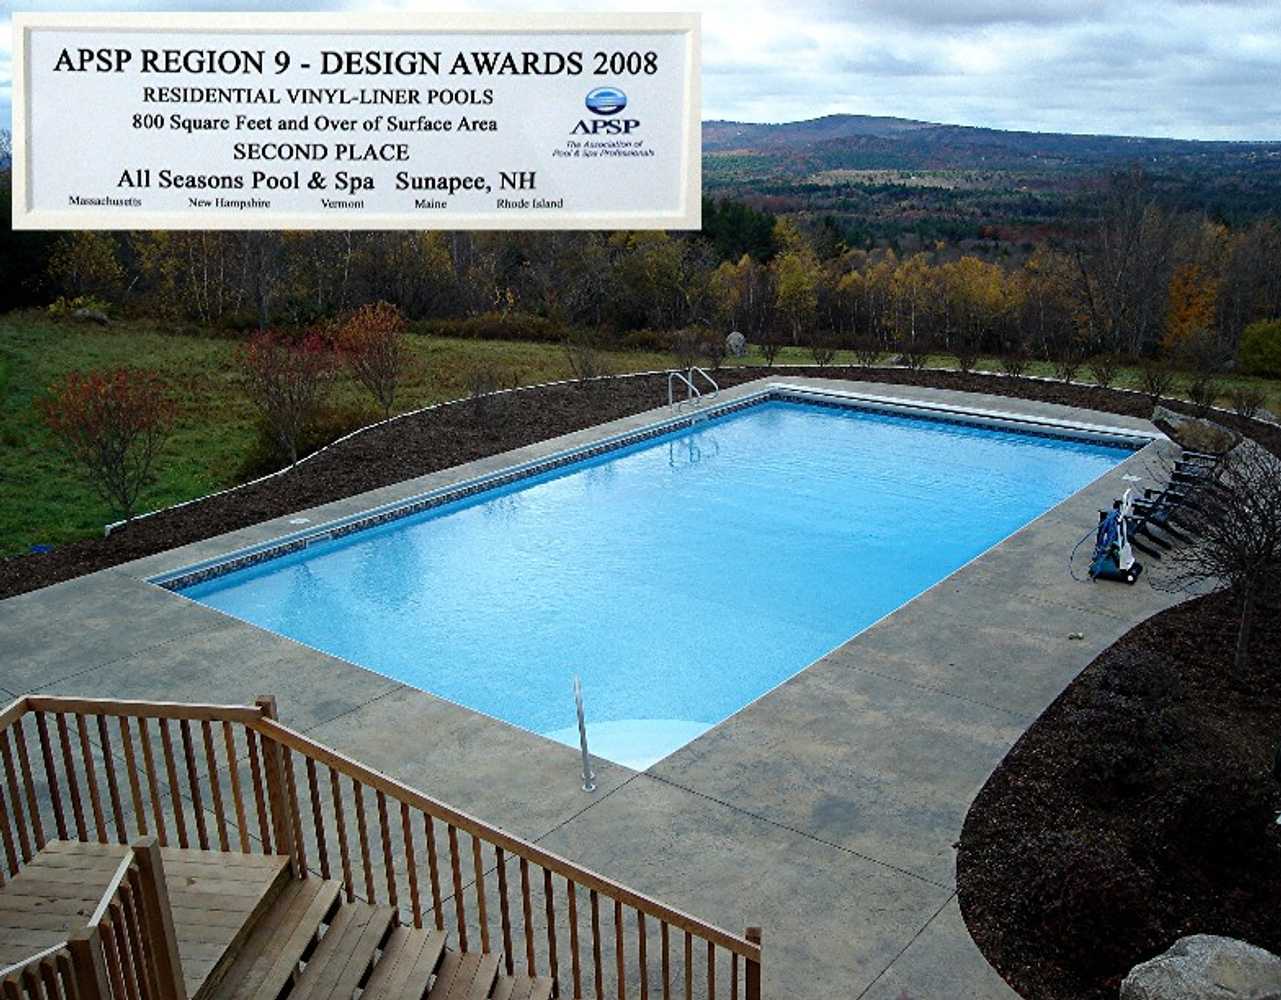 Project photos from All Seasons Pool & Spa